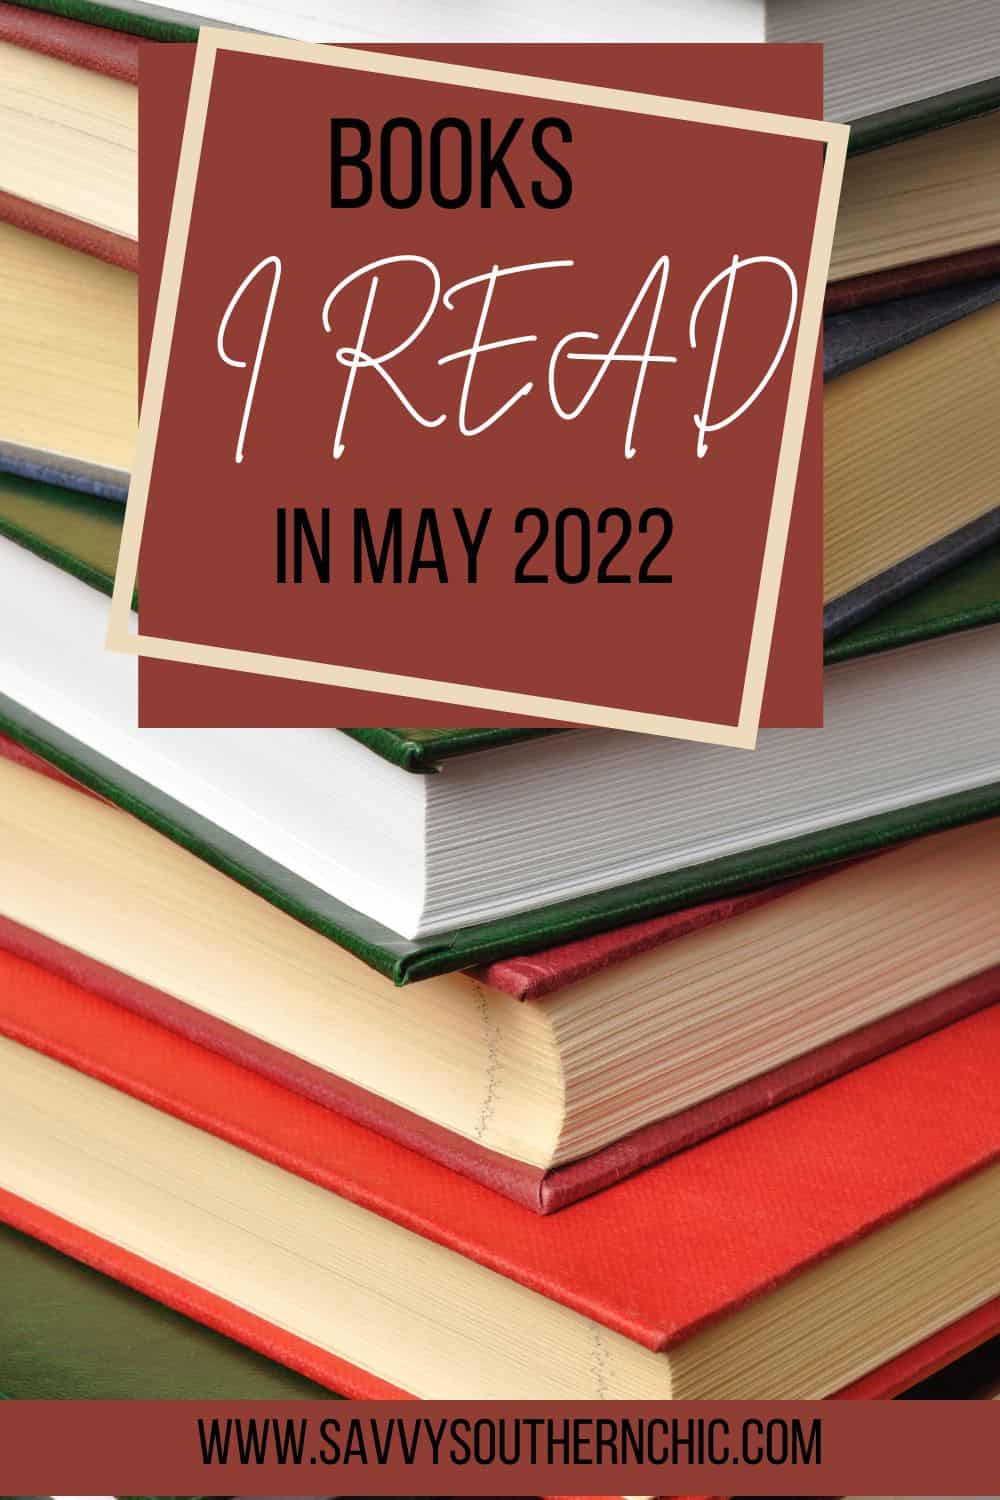 Book reviews for May 2022